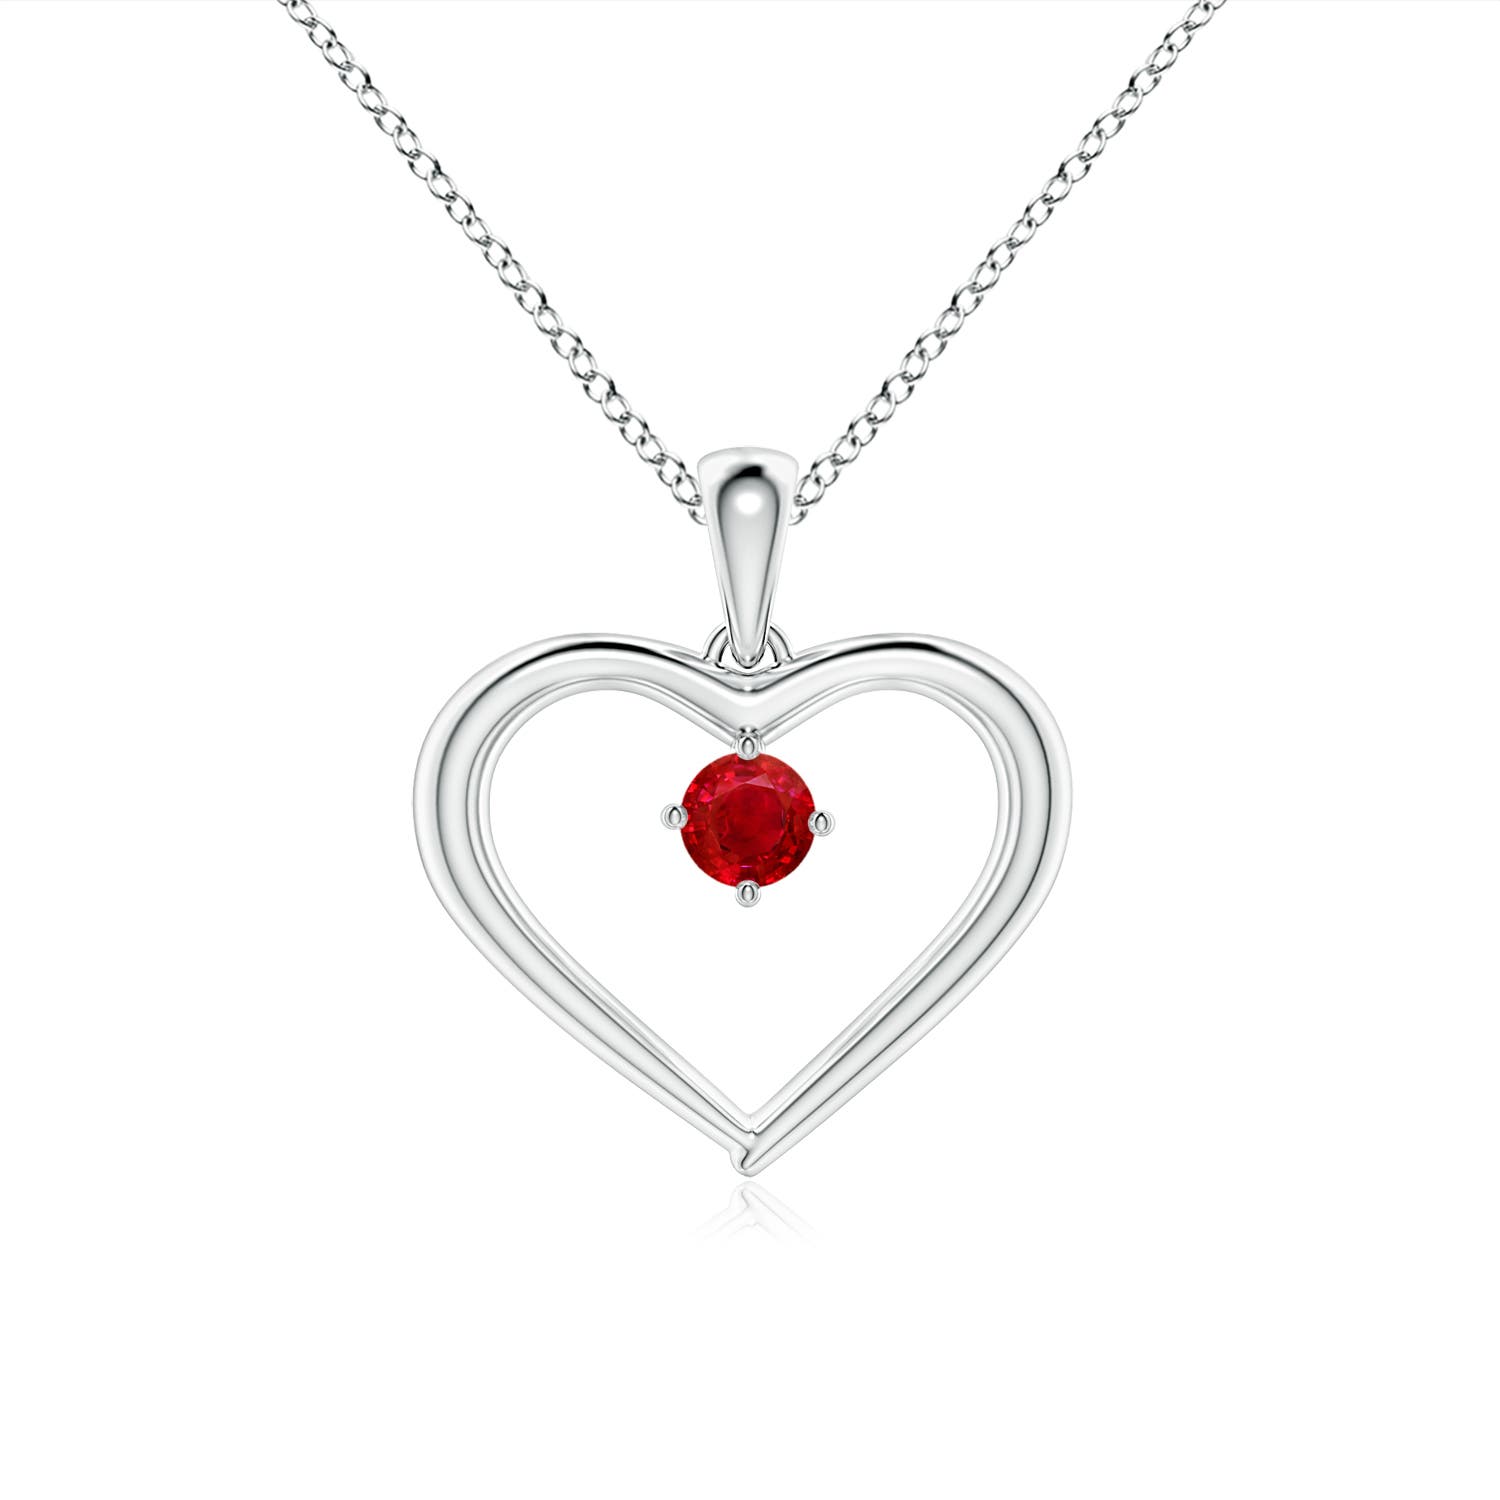 AAA - Ruby / 0.15 CT / 14 KT White Gold